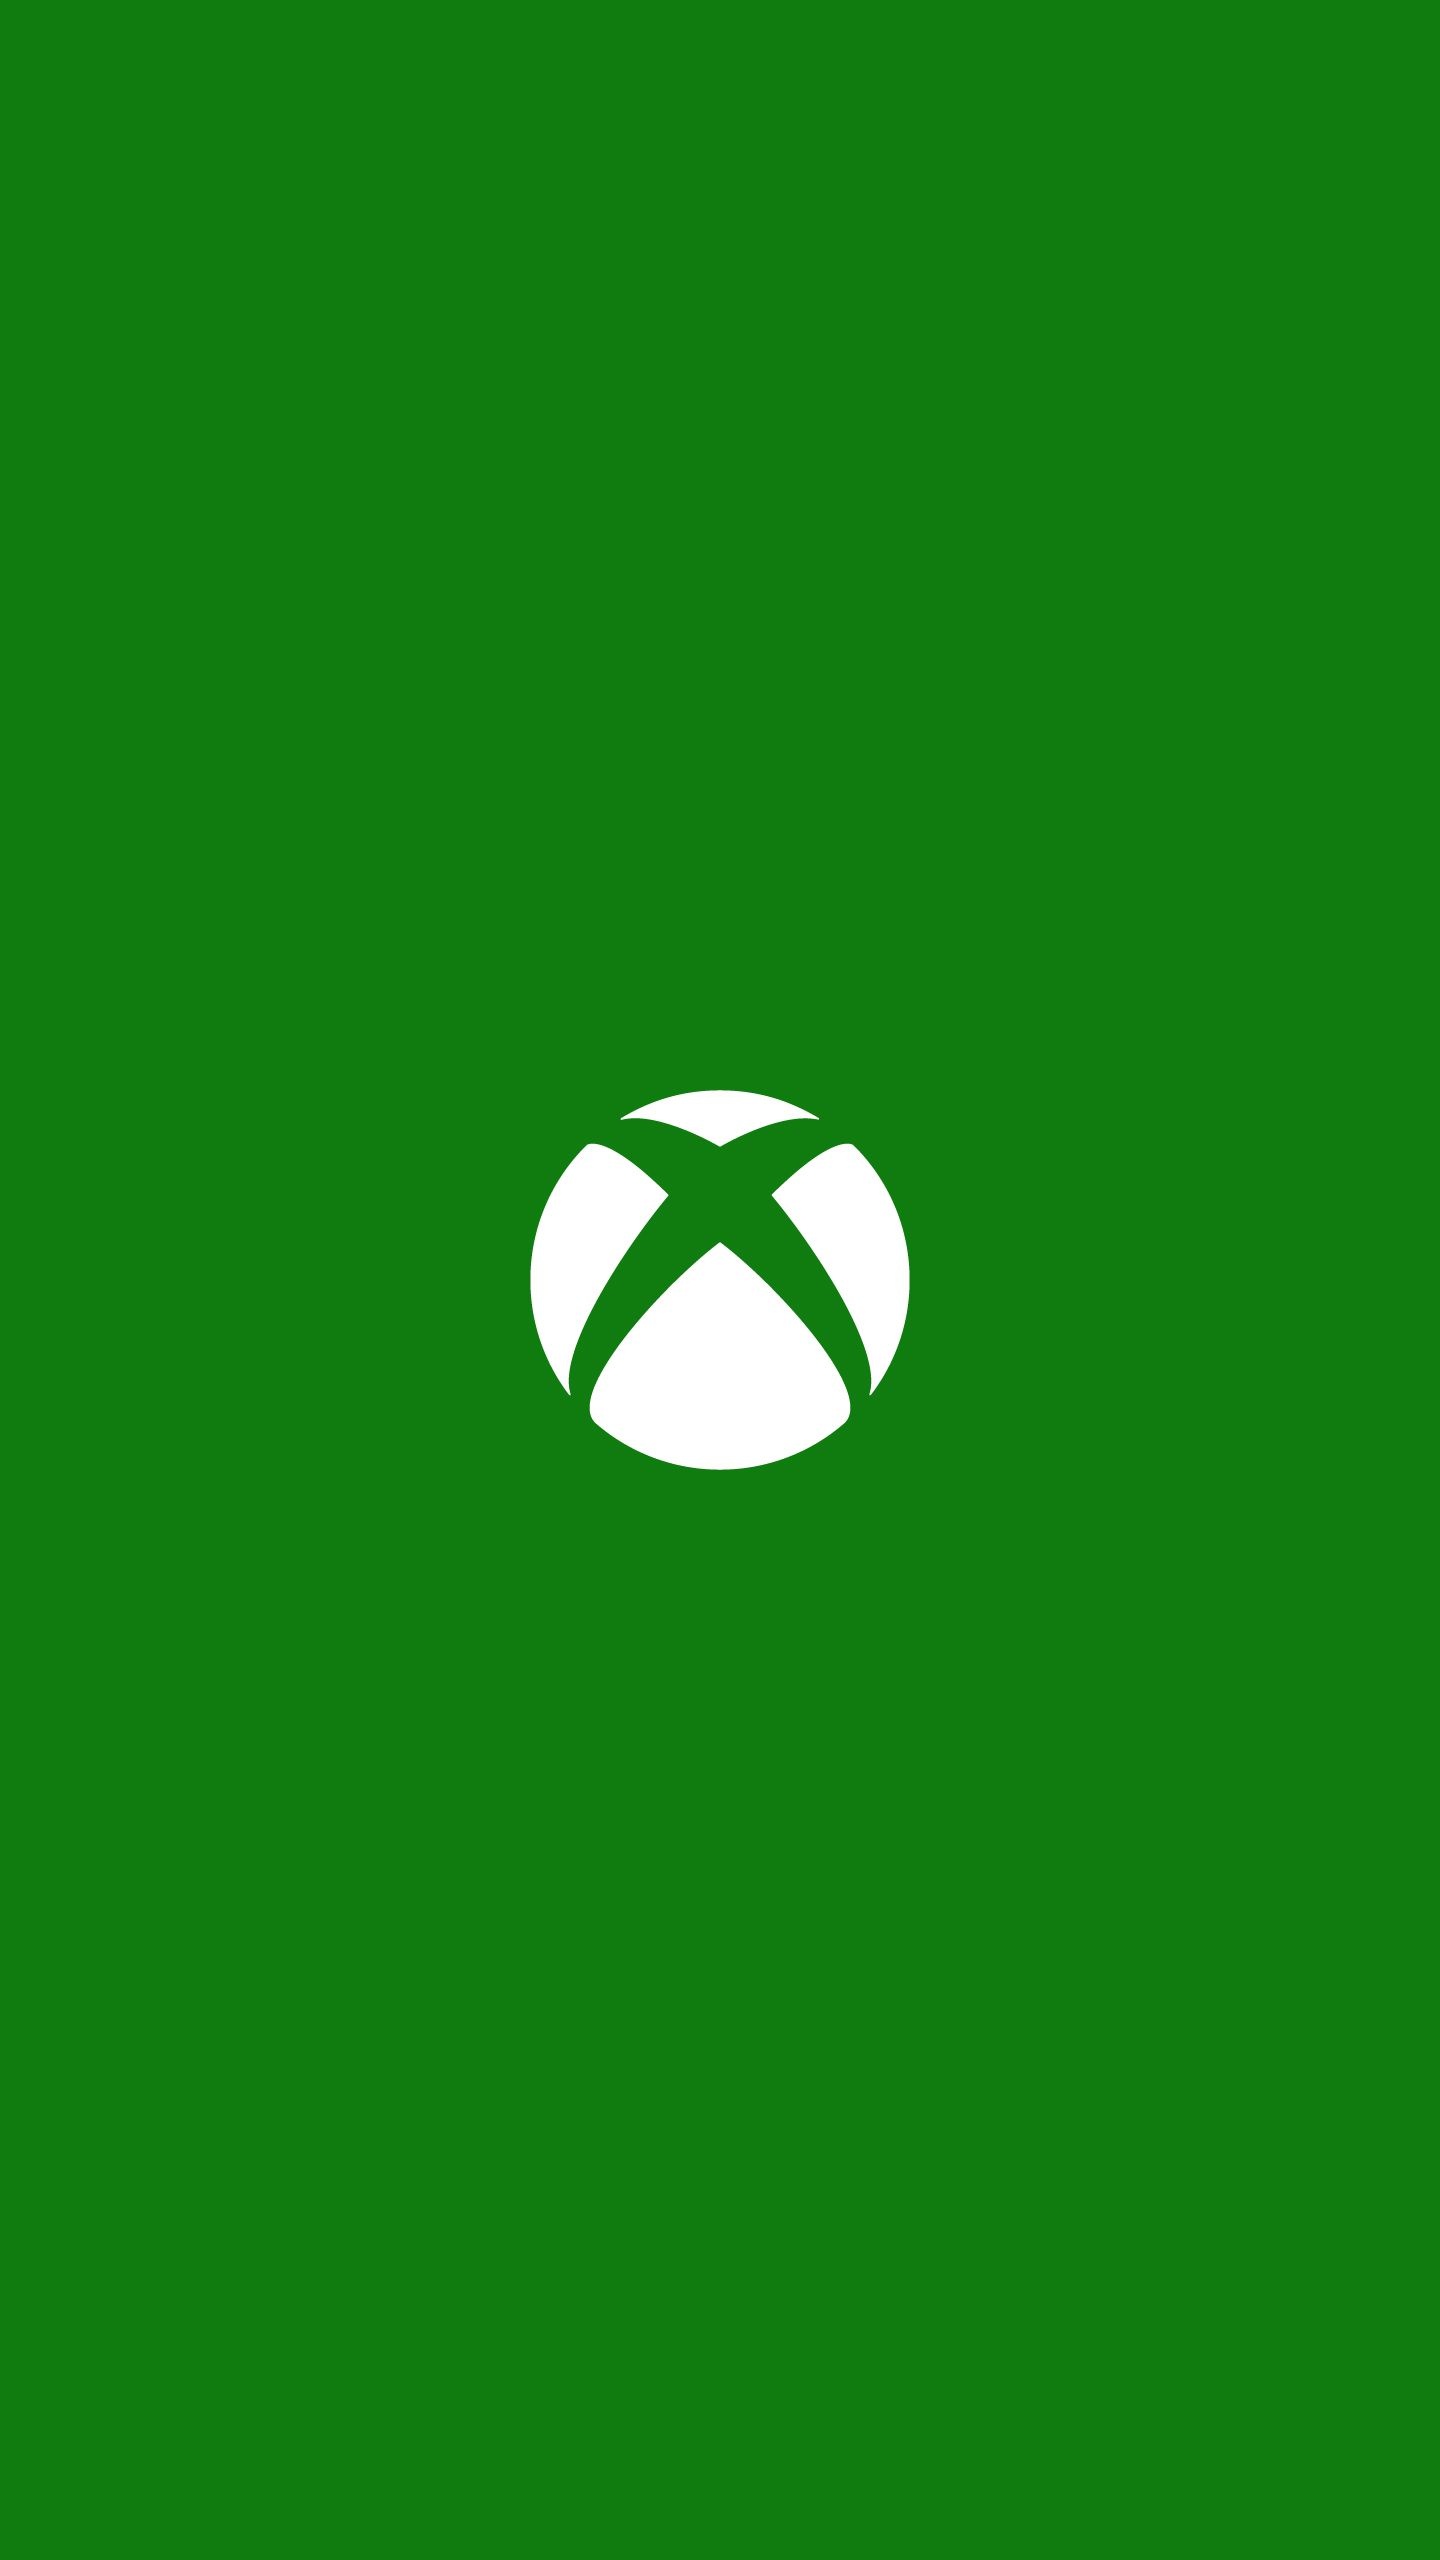 Xbox: A gaming console brand developed and owned by Microsoft, Logotype. 1440x2560 HD Background.